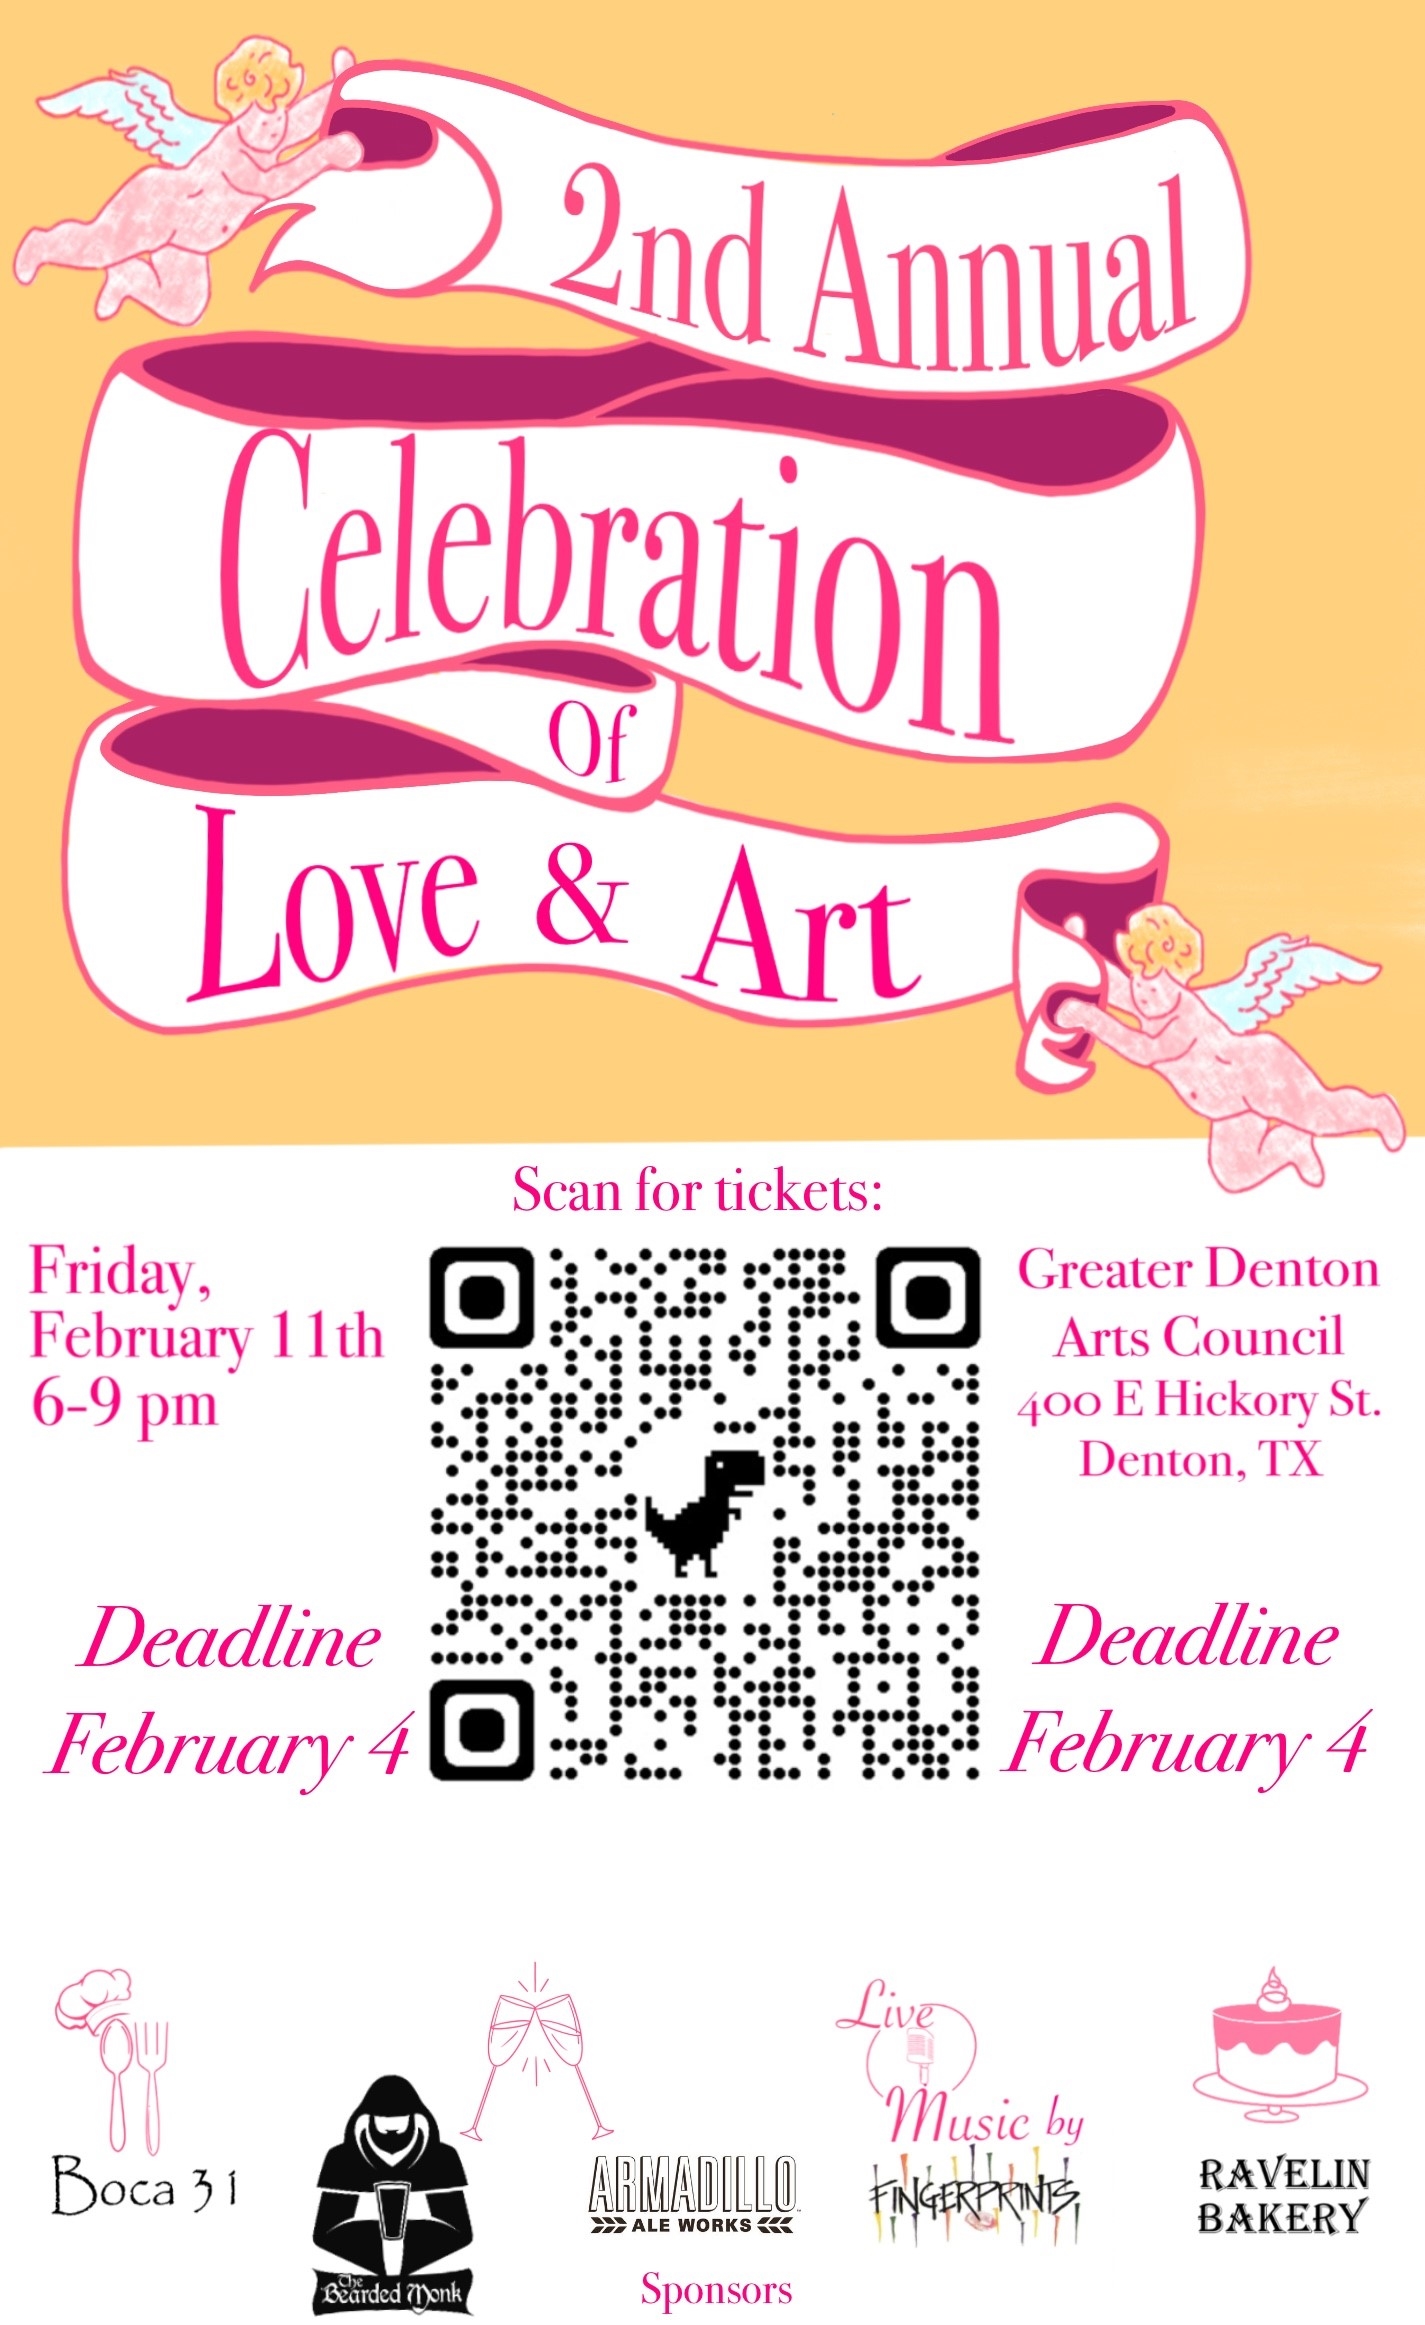 The 2nd annual Celebration of Love and Art